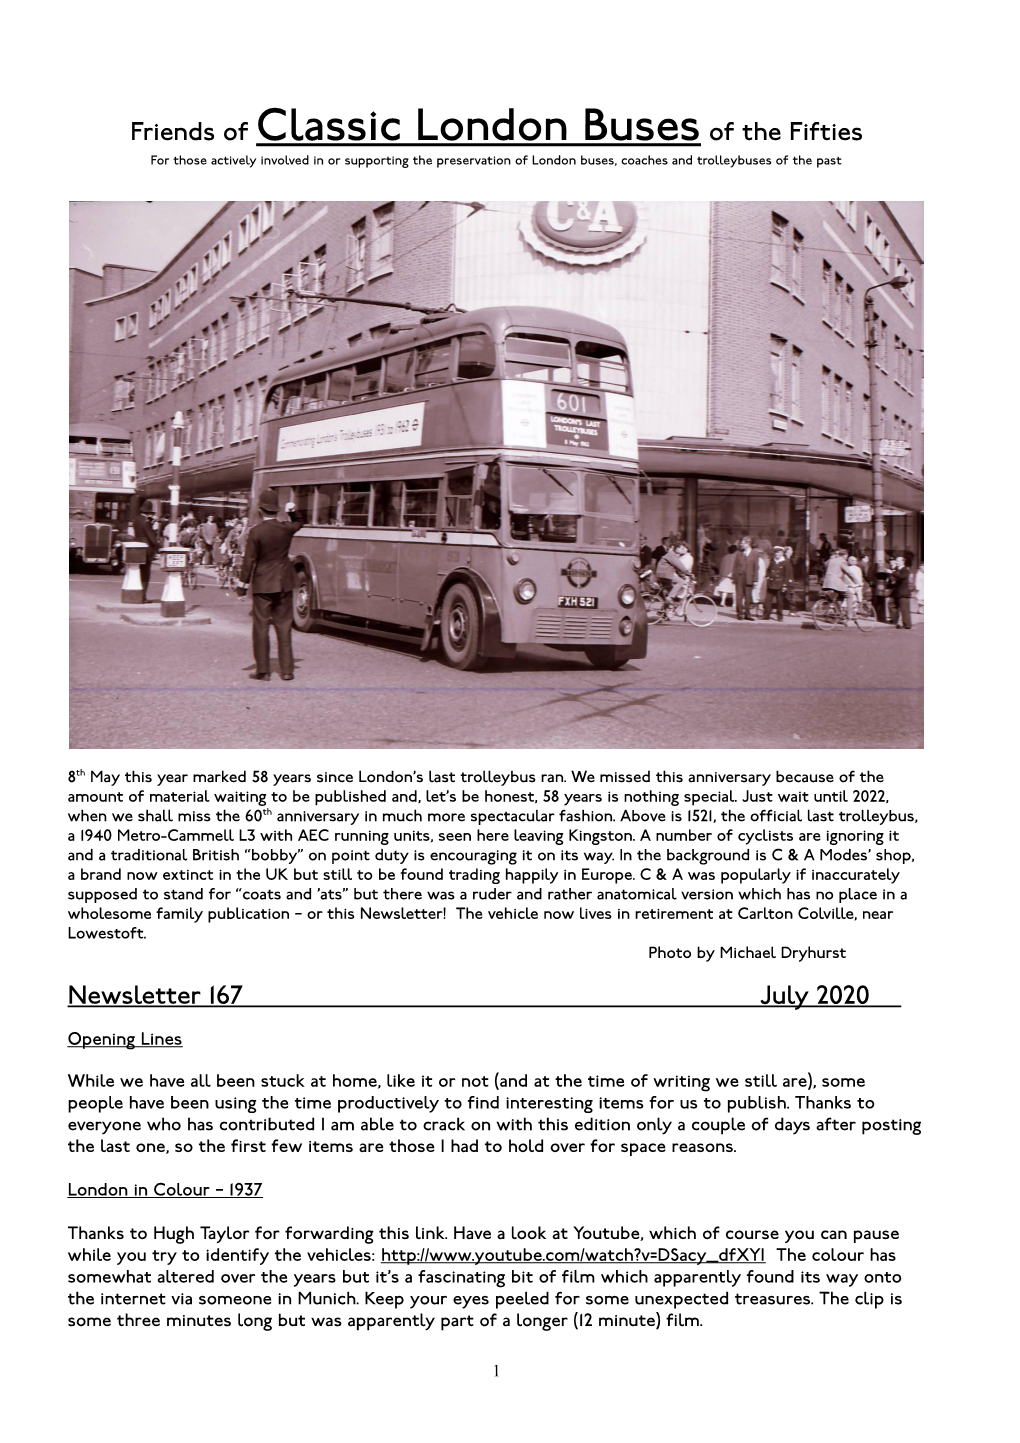 Friends of Classic London Buses of the Fifties for Those Actively Involved in Or Supporting the Preservation of London Buses, Coaches and Trolleybuses of the Past